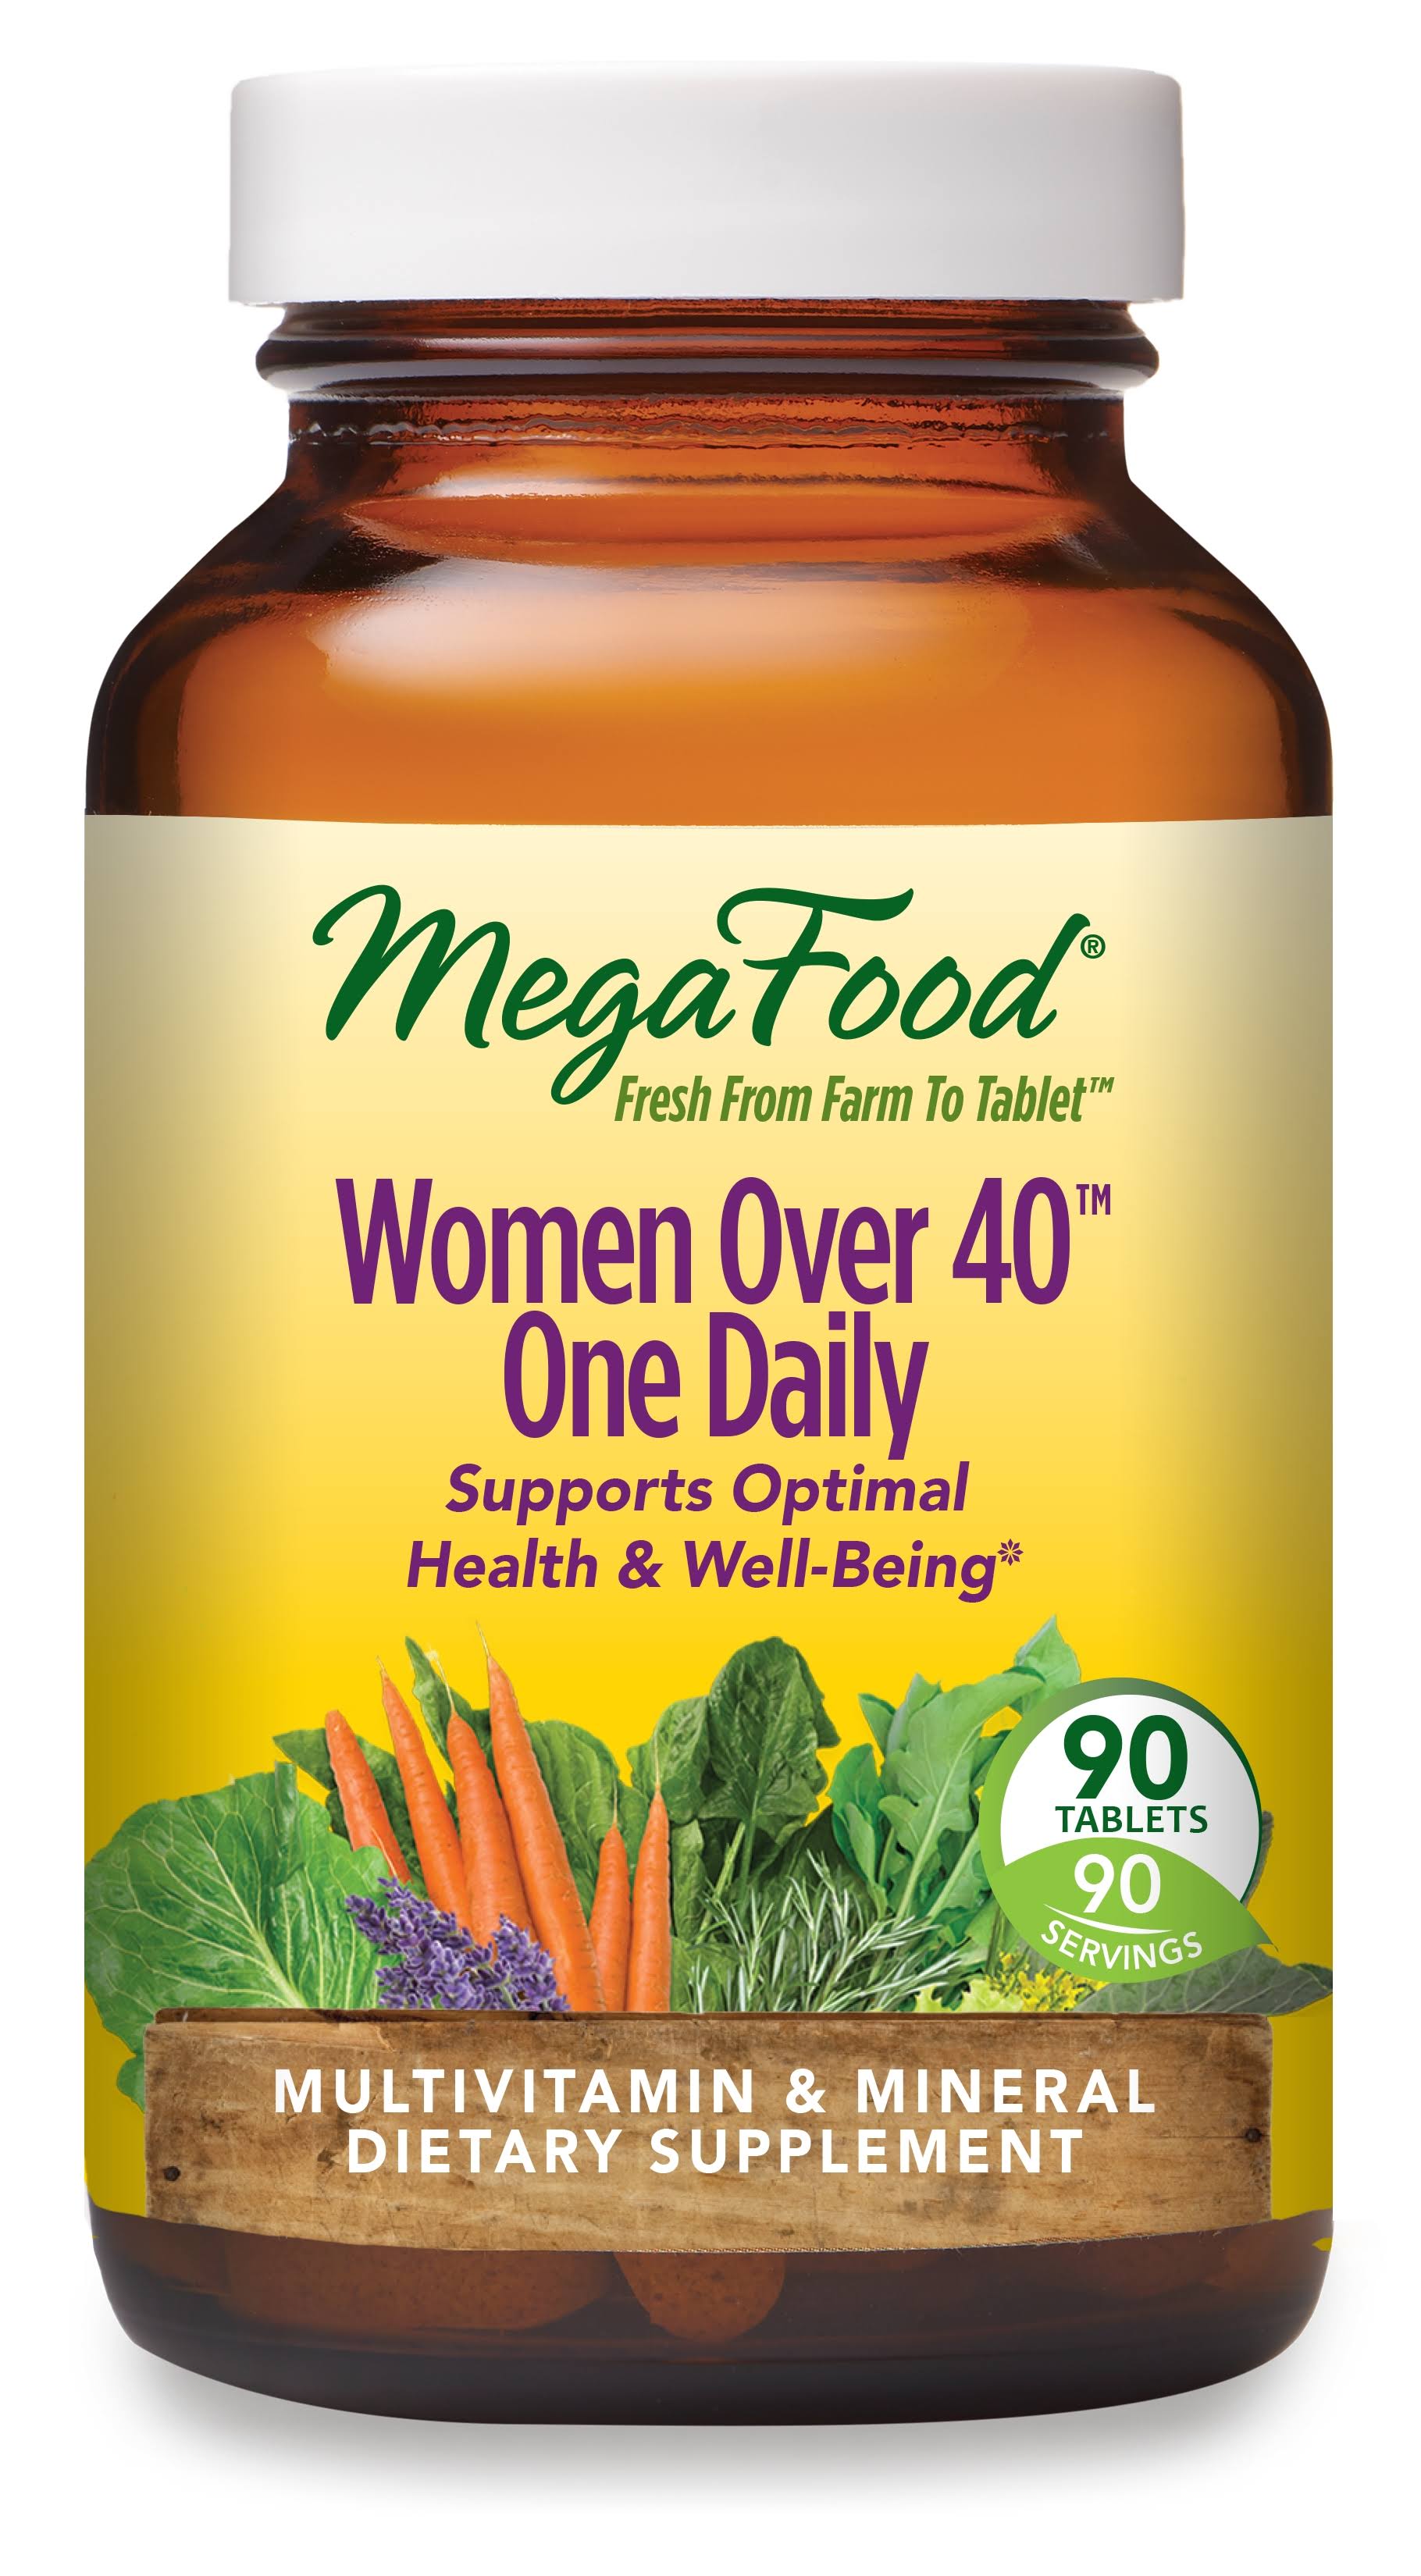 Megafood Dailyfoods Women Over 40 One Daily - 90 Tablets